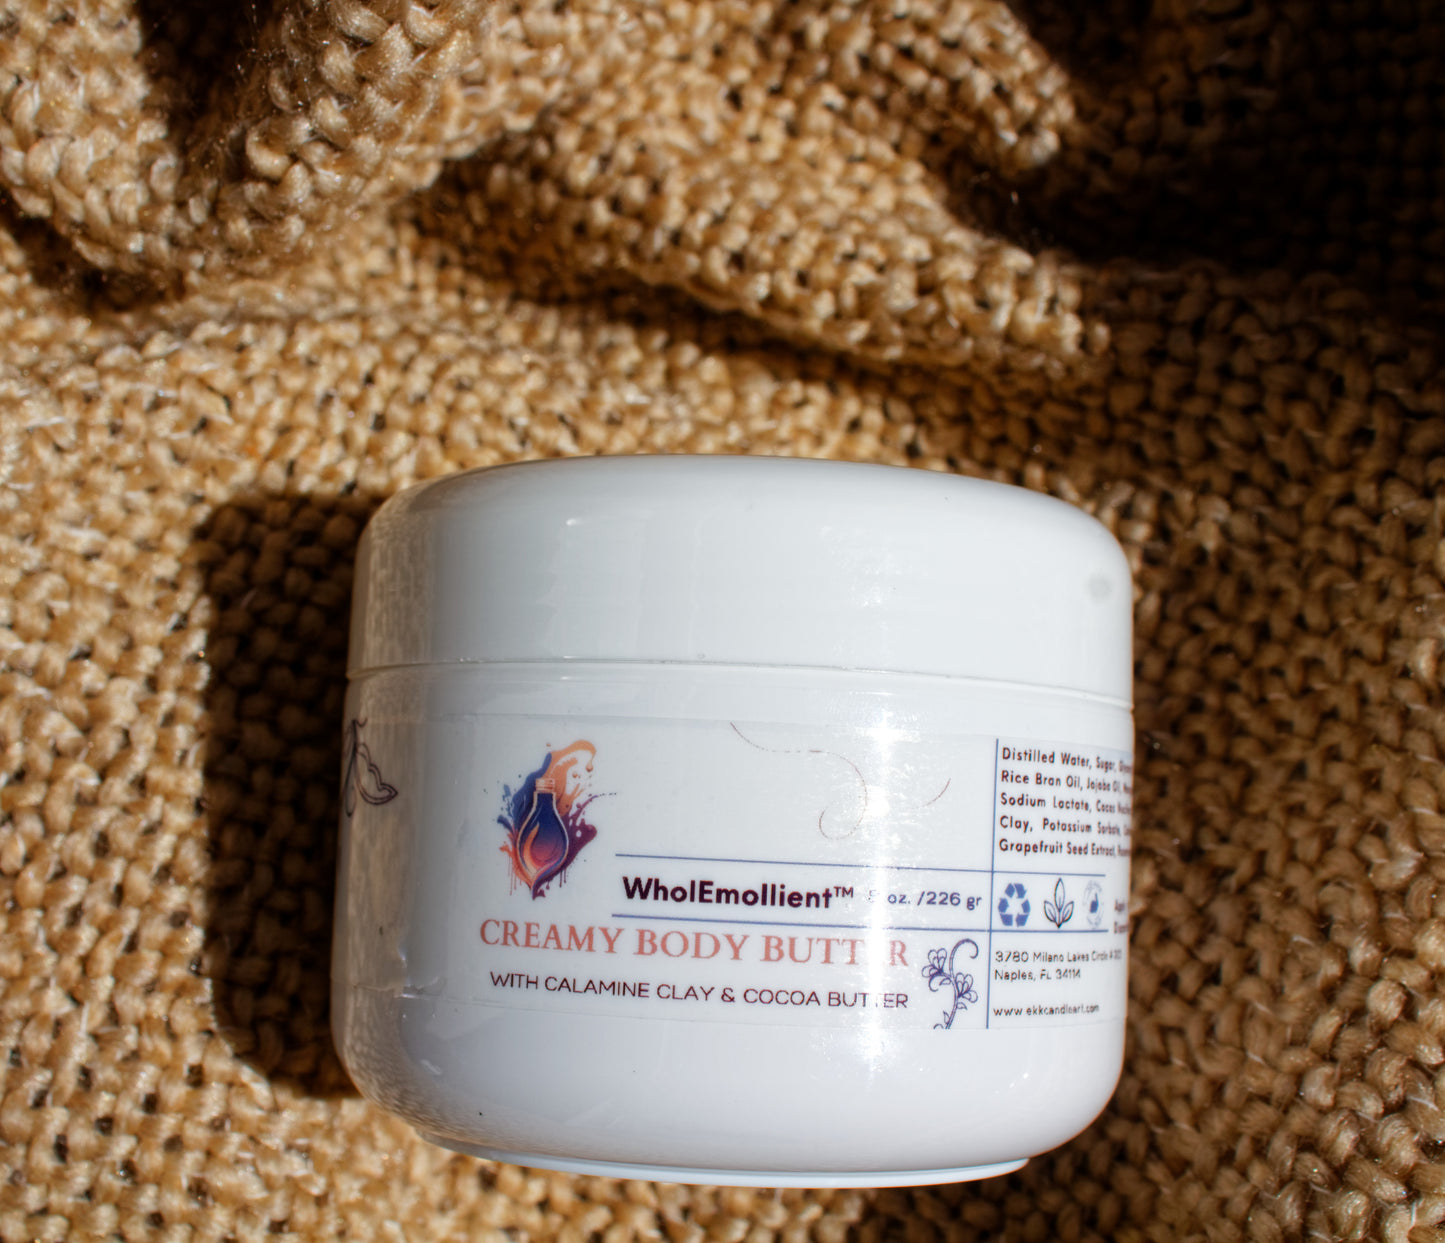 Creamy Coco Butter Body Butter